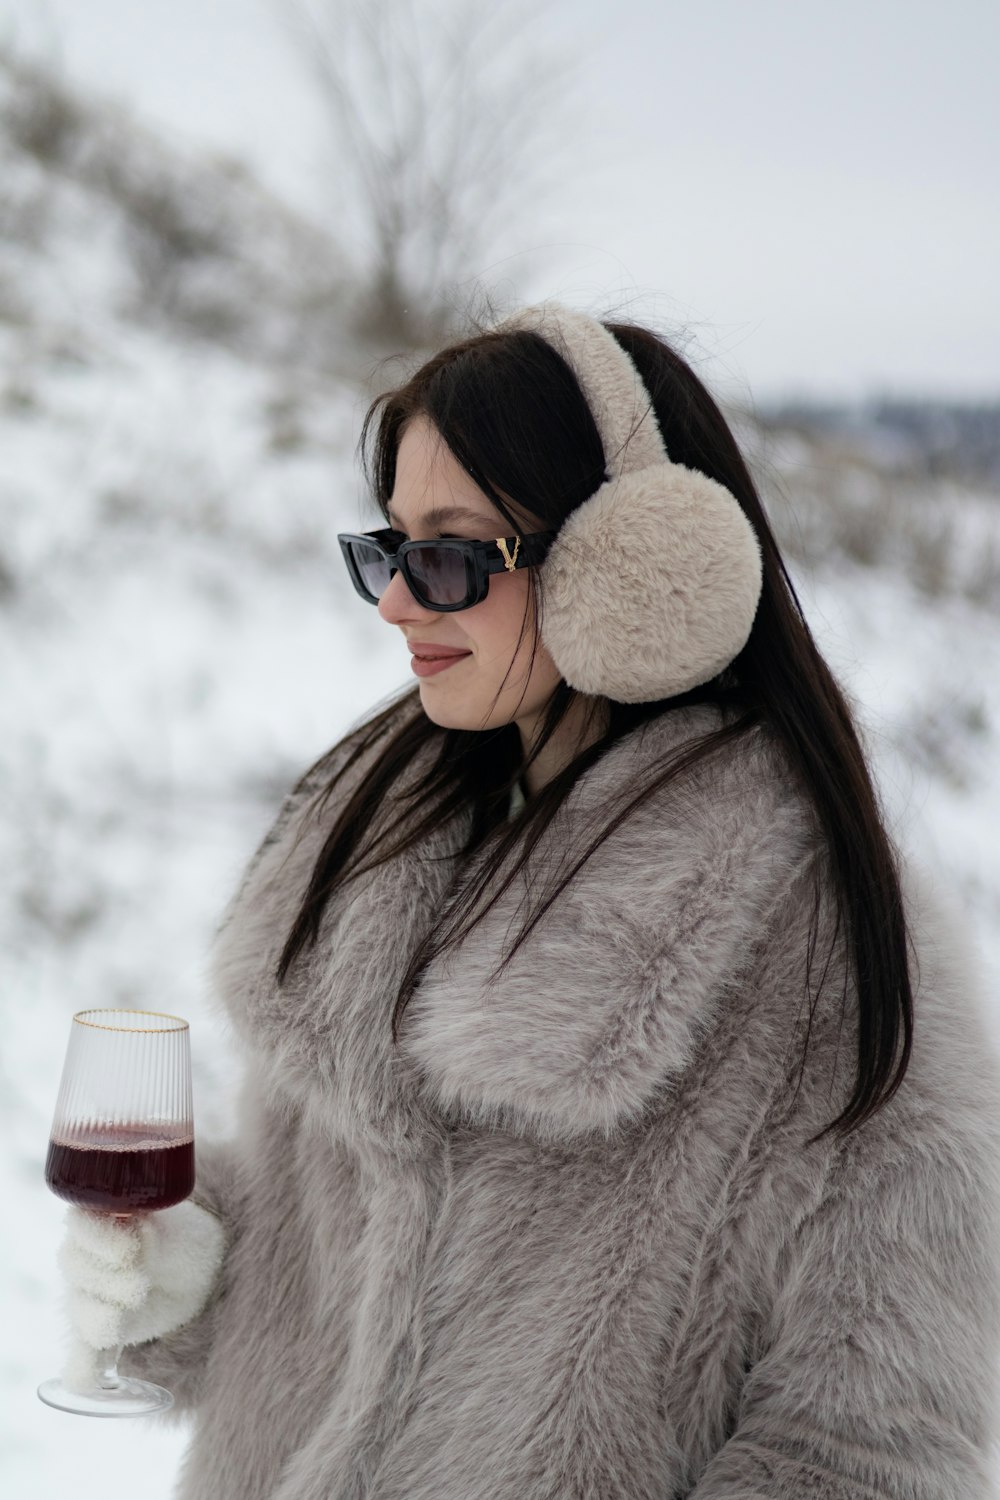 a woman wearing headphones holding a glass of wine